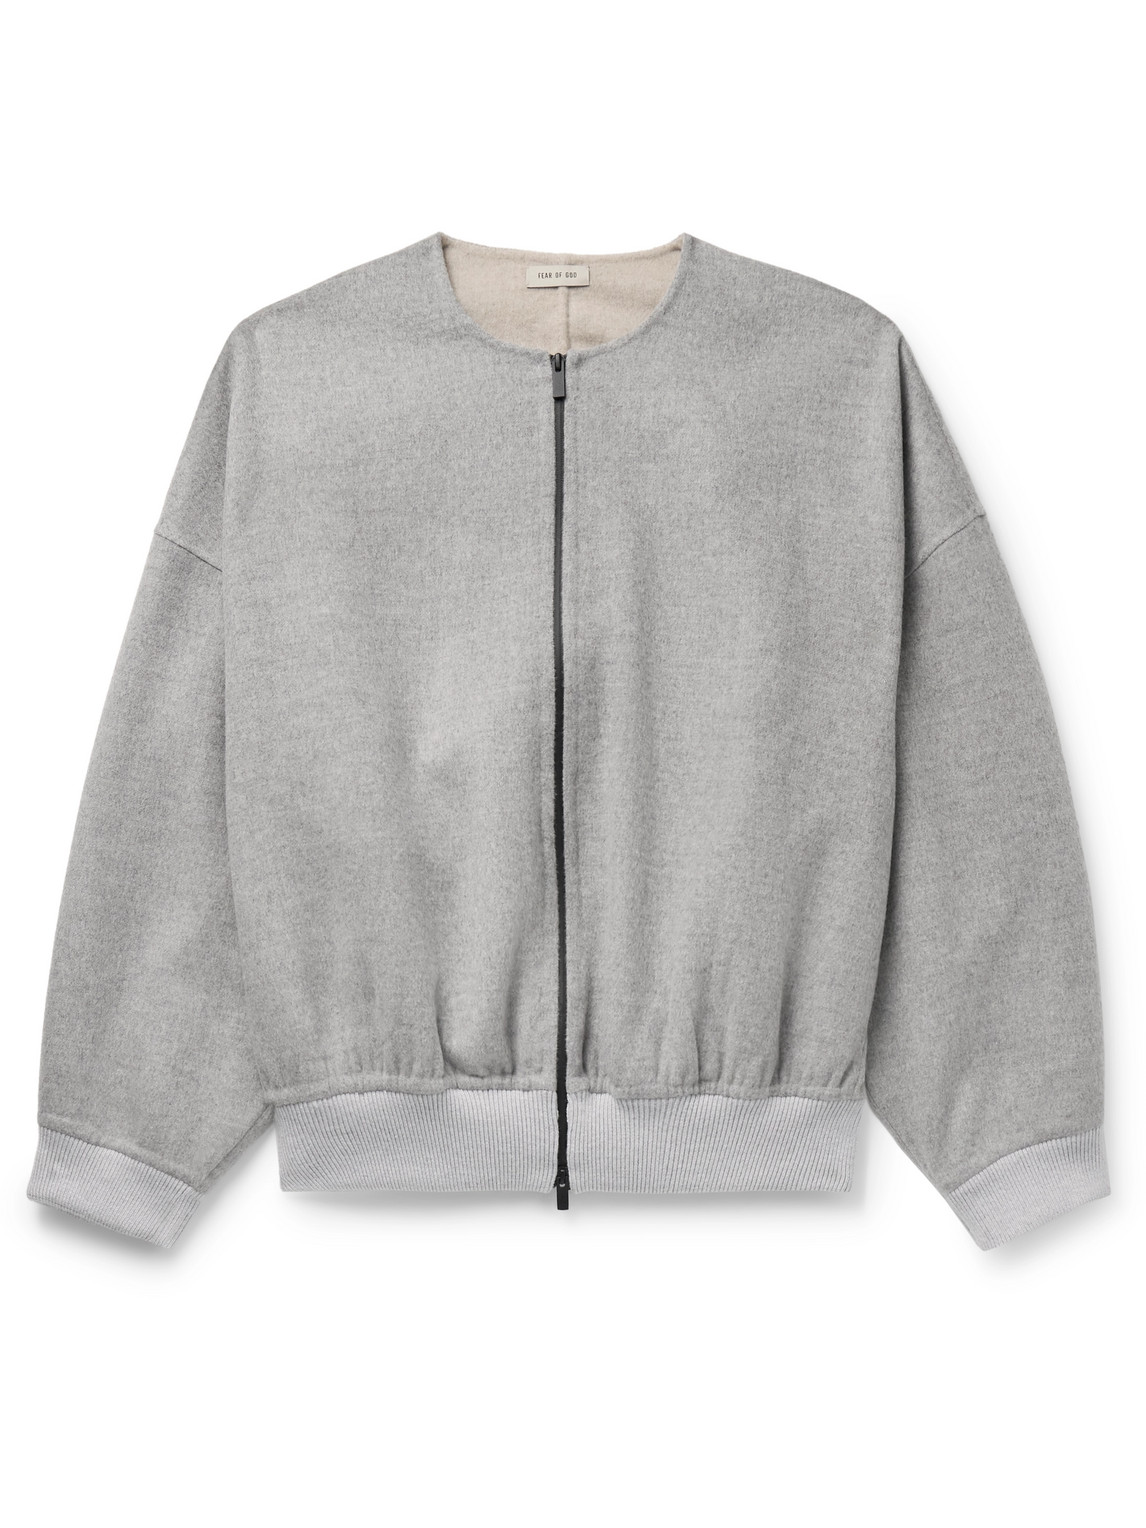 Fear of God - Double-Faced Wool and Cashmere-Blend Bomber Jacket - Men - Gray - S von Fear of God